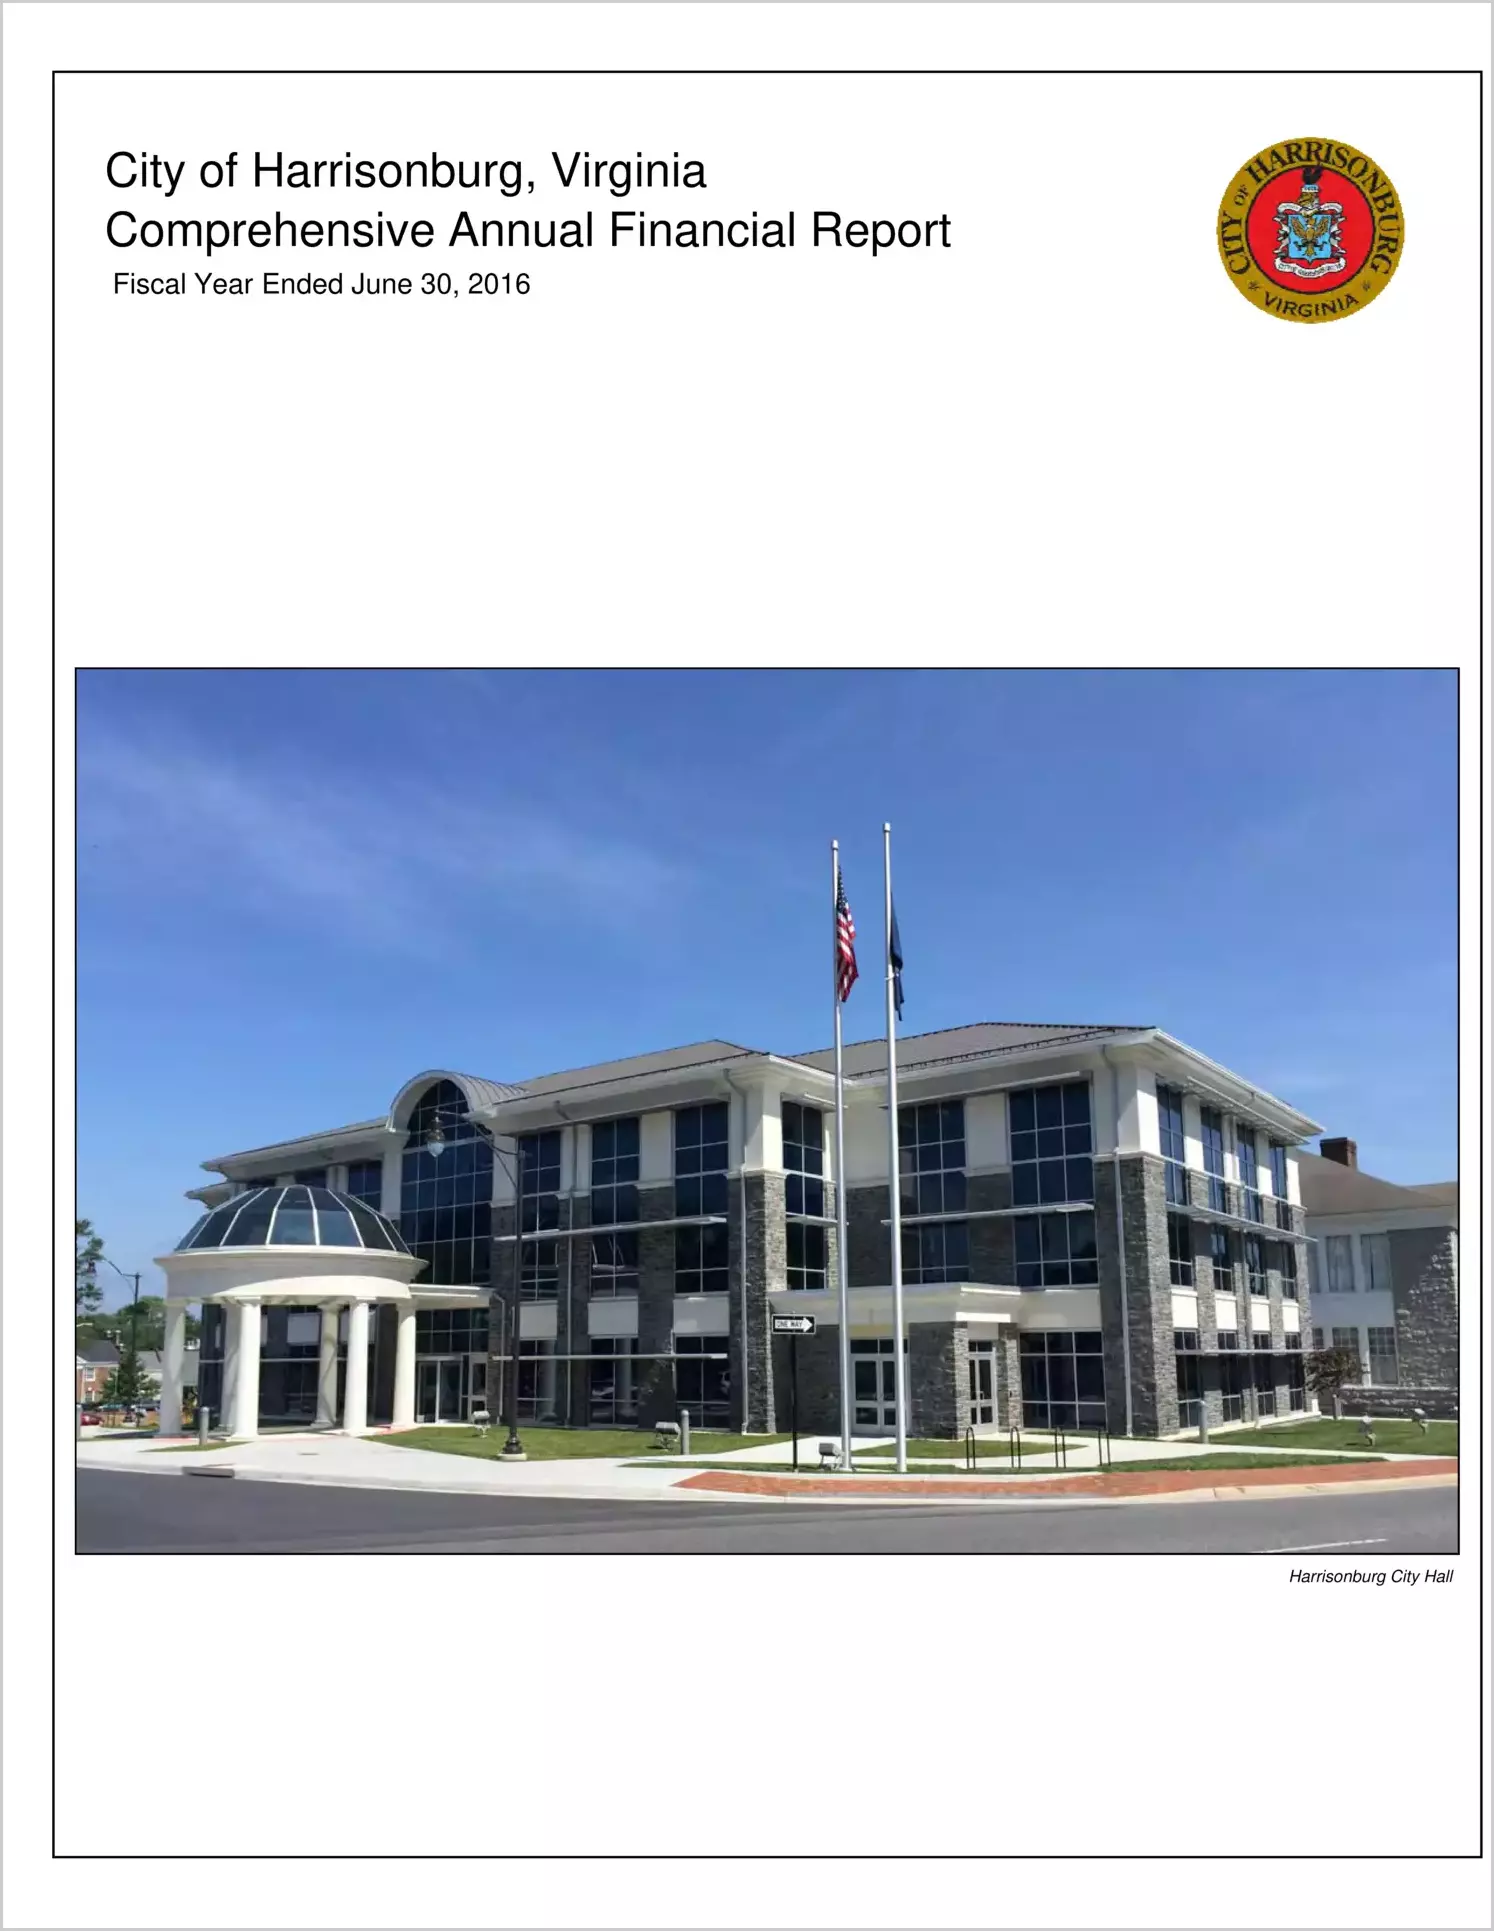 2016 Annual Financial Report for City of Harrisonburg